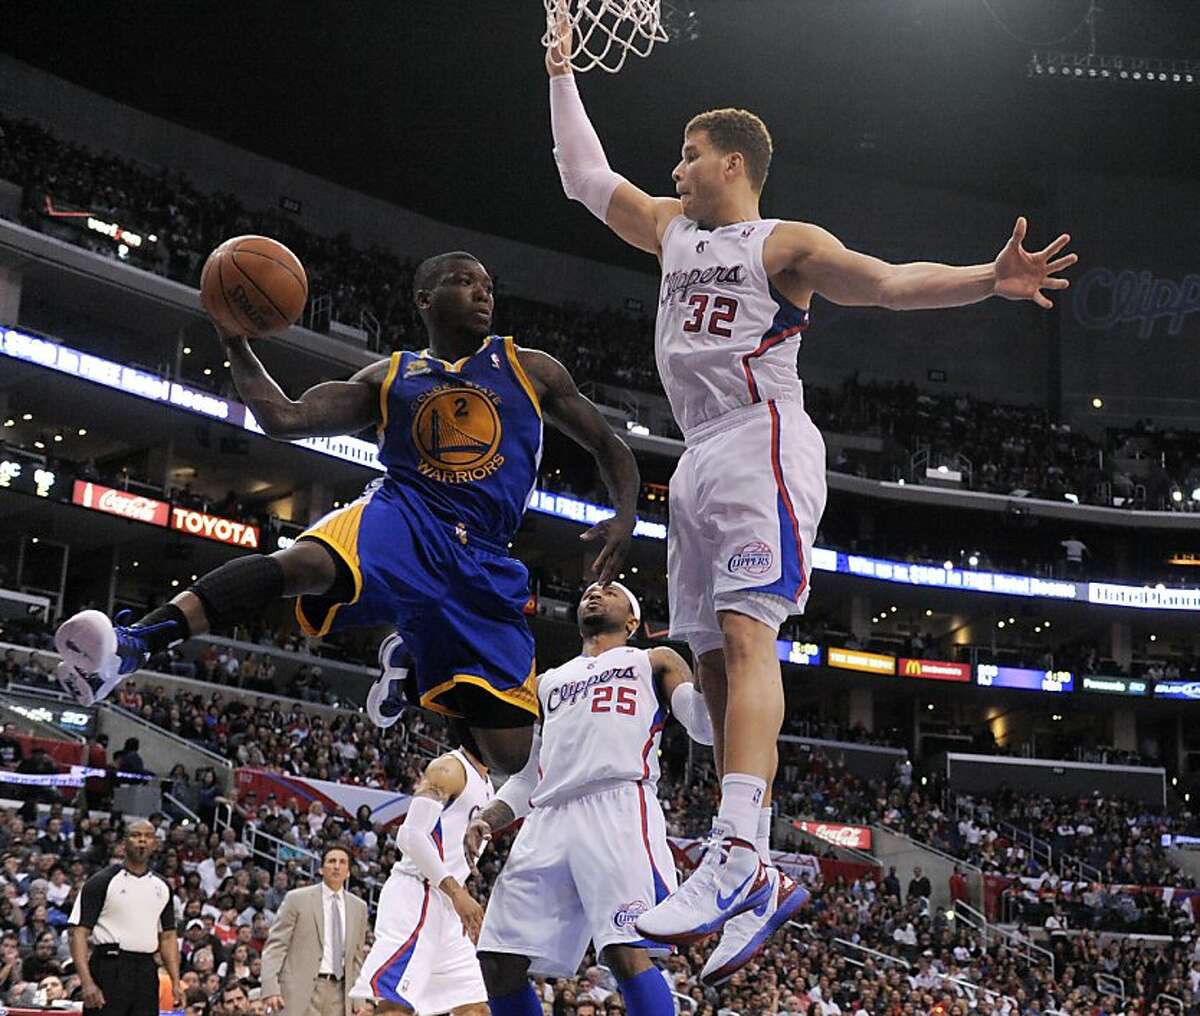 Golden State Warriors guard Nate Robinson, left, passes around Los Angeles Clippers forward Blake Griffin (32) during the second half of an NBA basketball game in Los Angeles, Saturday, April 14, 2012.